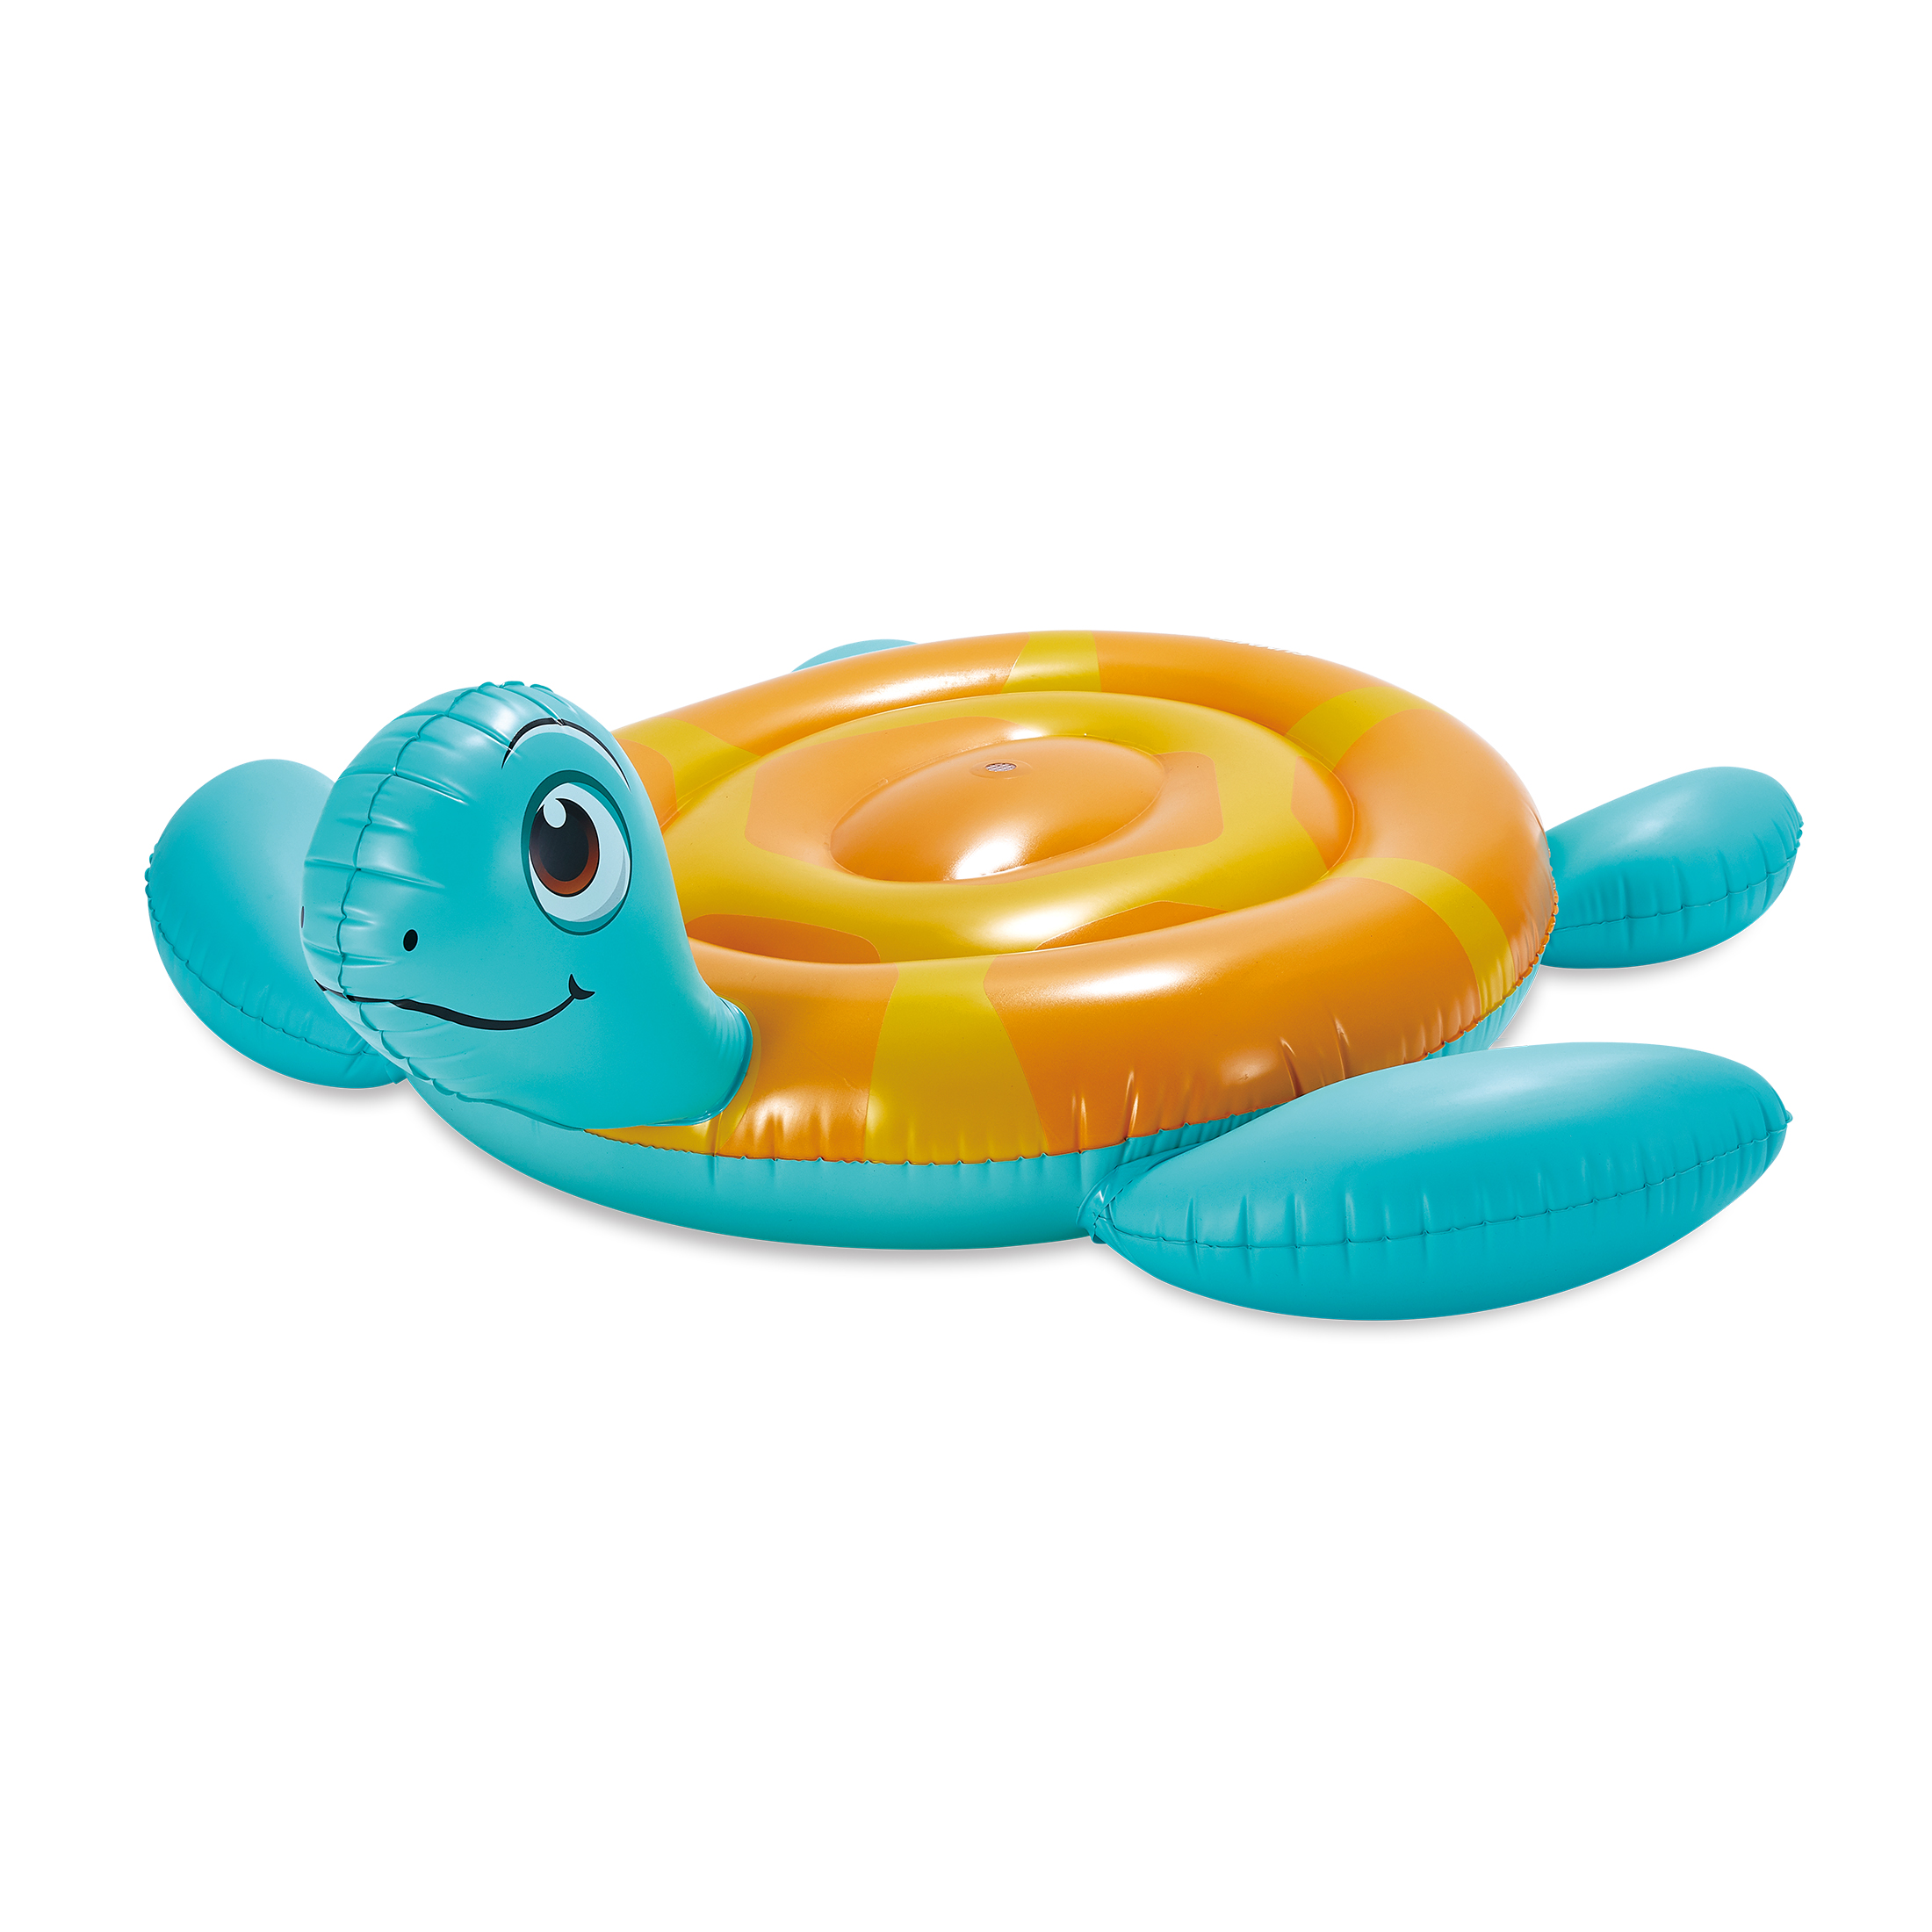 Play Day Inflatable Sea Turtle Water Sprinkler Yard Game, for Kids, Age 3 & up, Unisex - image 4 of 5